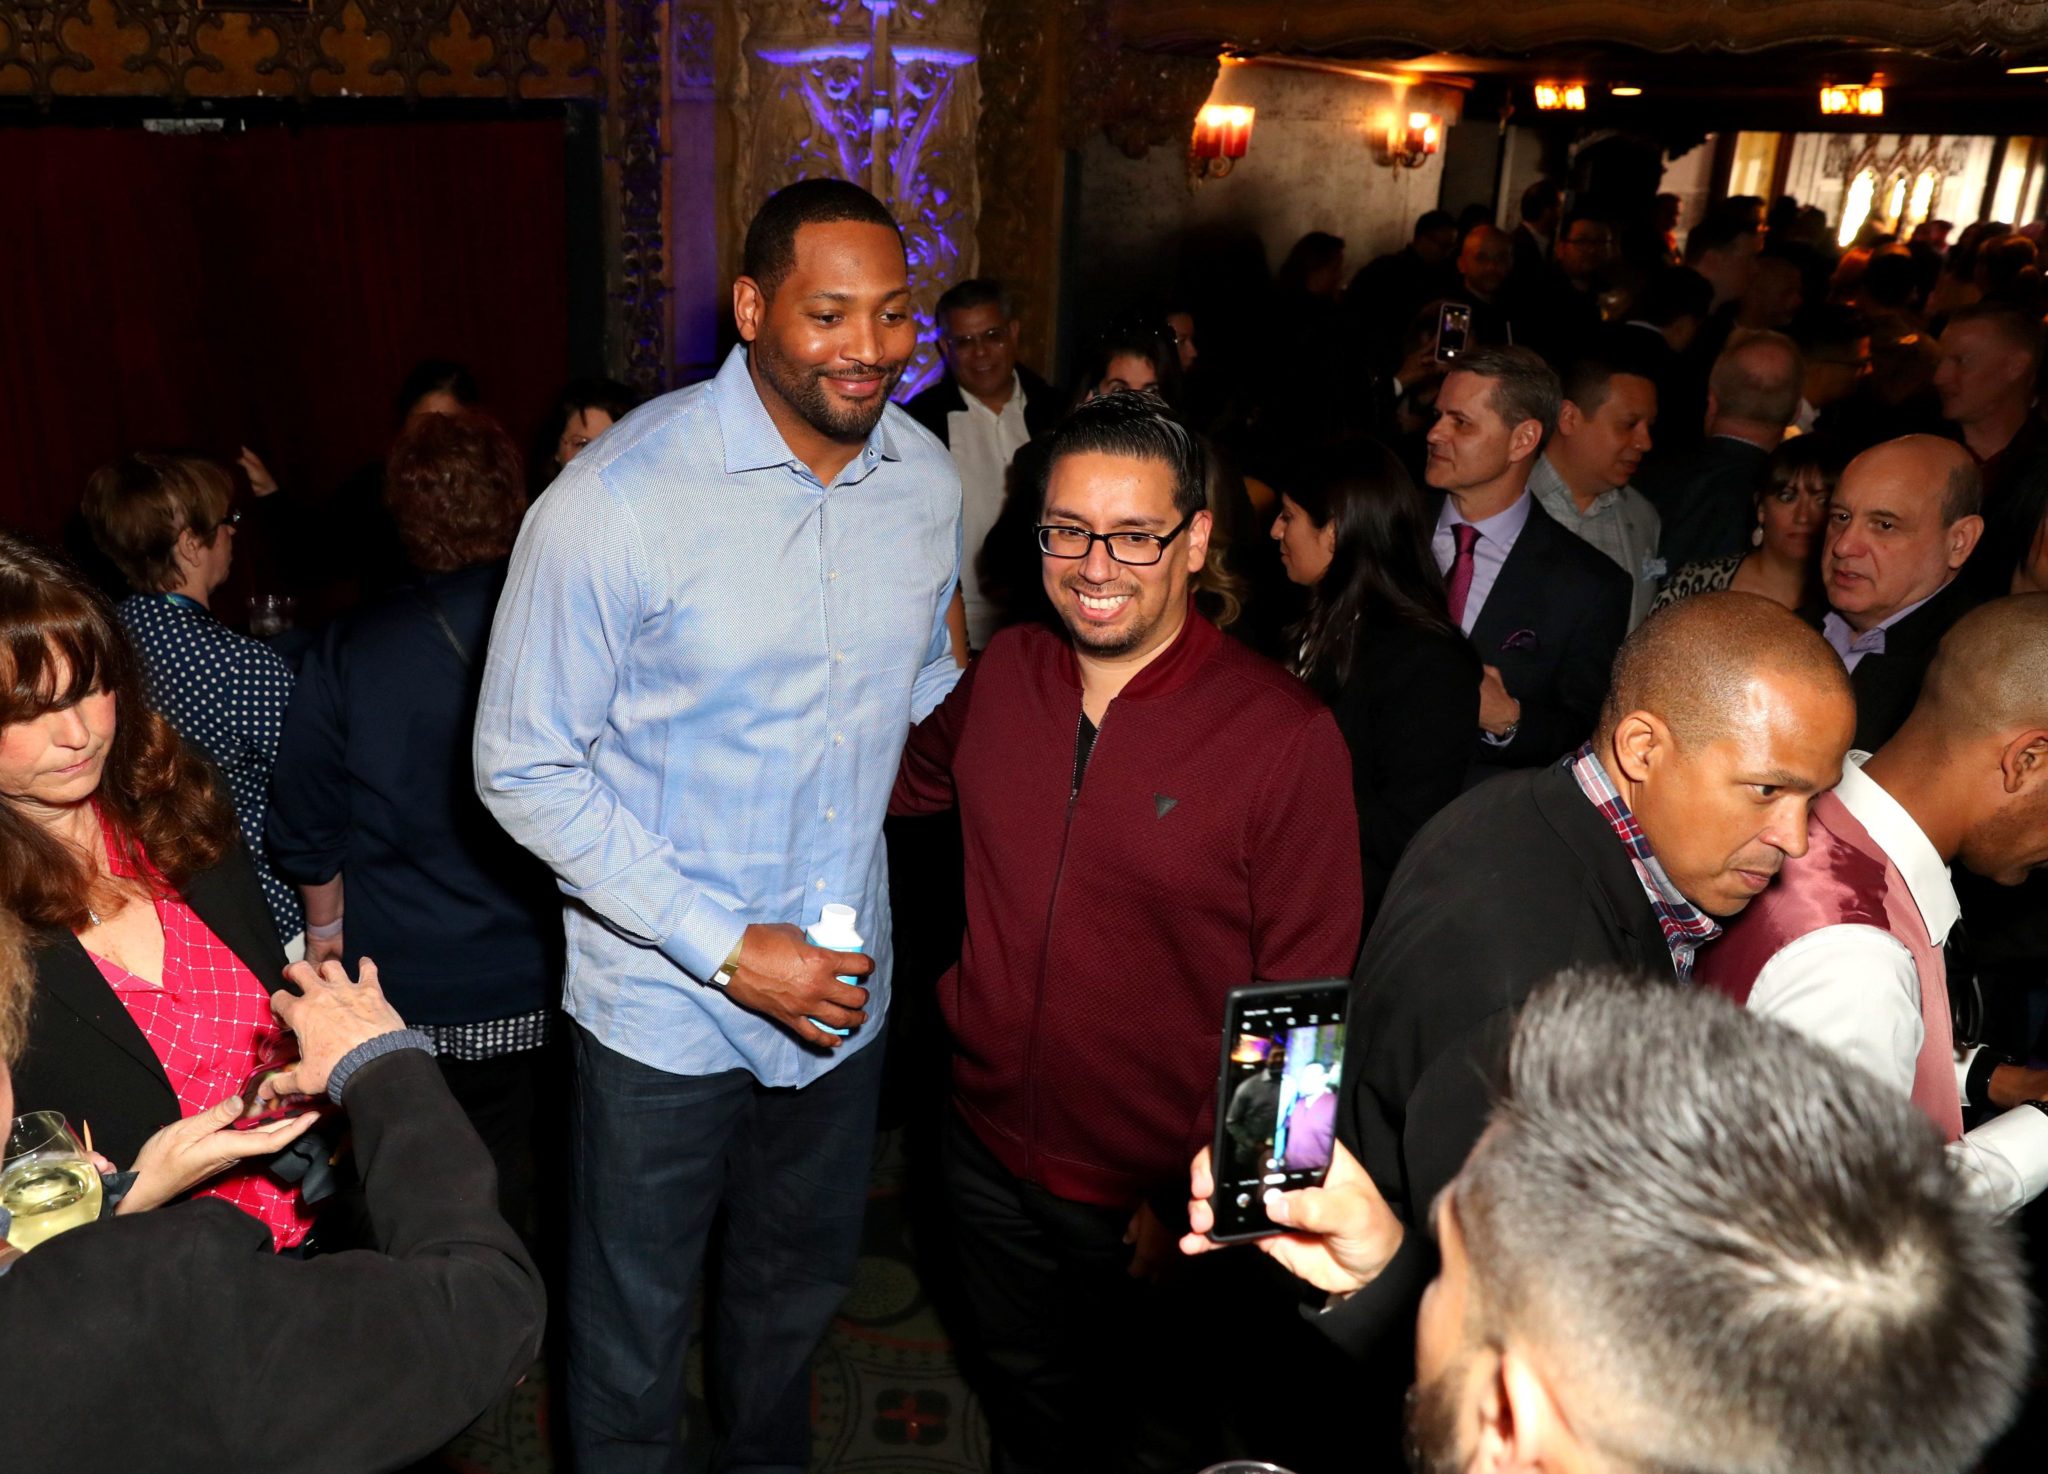 LOS ANGELES, CALIFORNIA - MARCH 4: Lakers legend Robert Horry attends the First Entertainment x Los Angeles Lakers and Anthony Davis Partnership Launch Event at The Theatre at Ace Hotel on March 4, 2020 in Los Angeles, California.  (Photo by Joe Scarnici/Getty Images for First Entertainment)